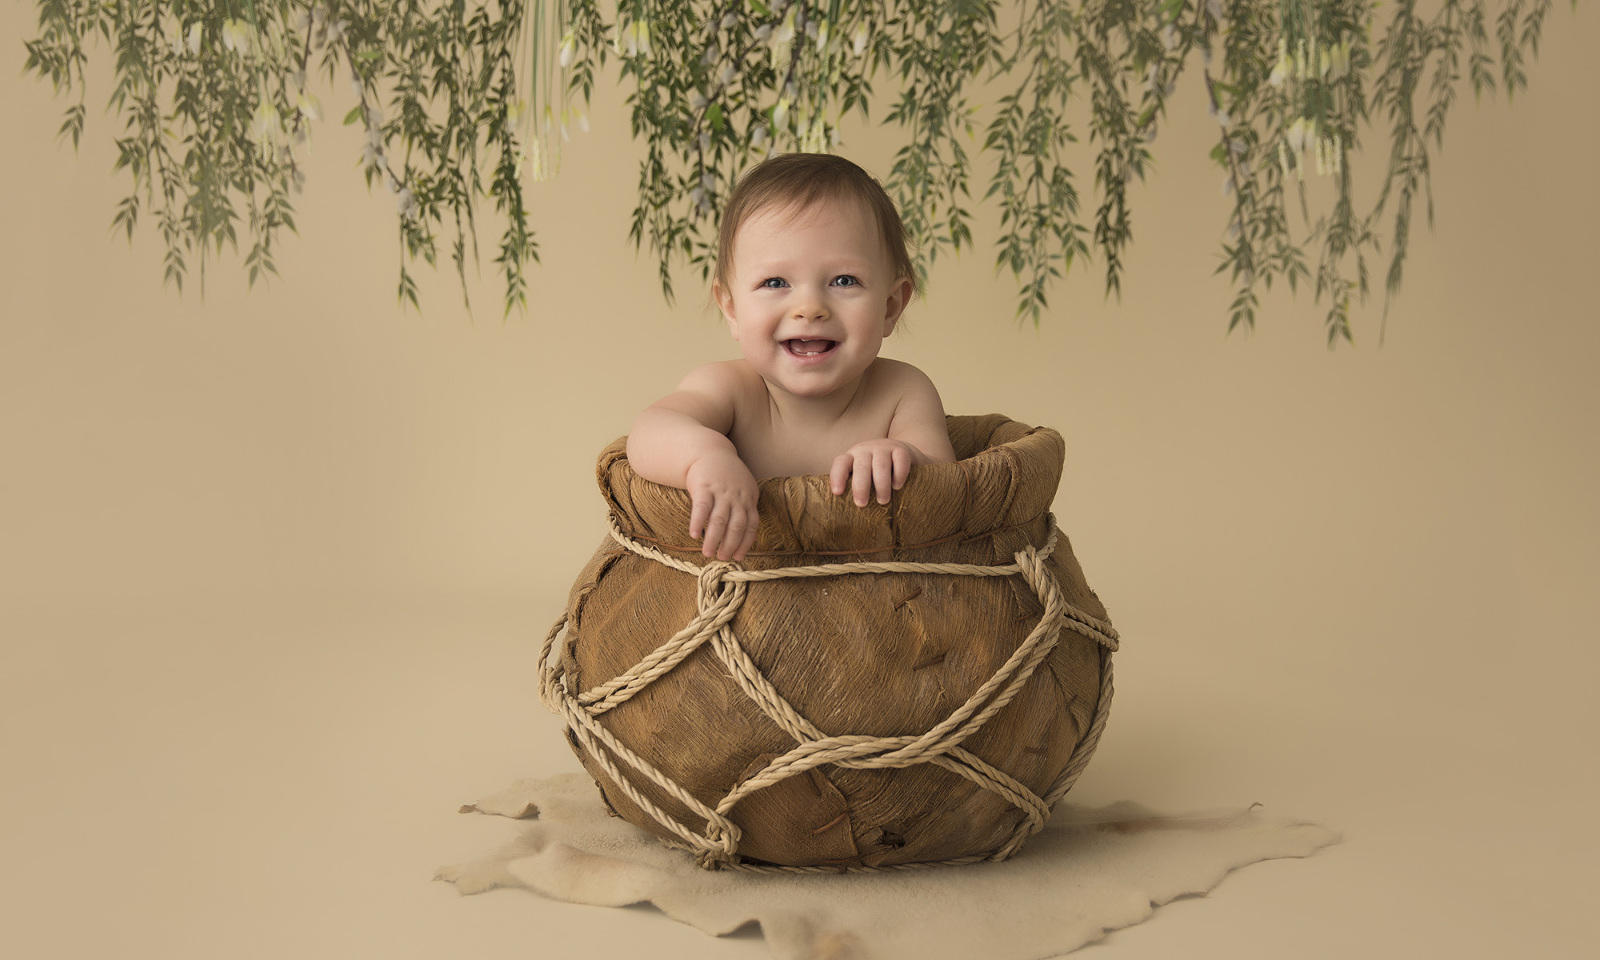 Studio child portrait session, the six-month-old child smiles and faces forward, sitting in a brown gourd container. Image by Helga Himer Photography, Sudbury, Ontario.